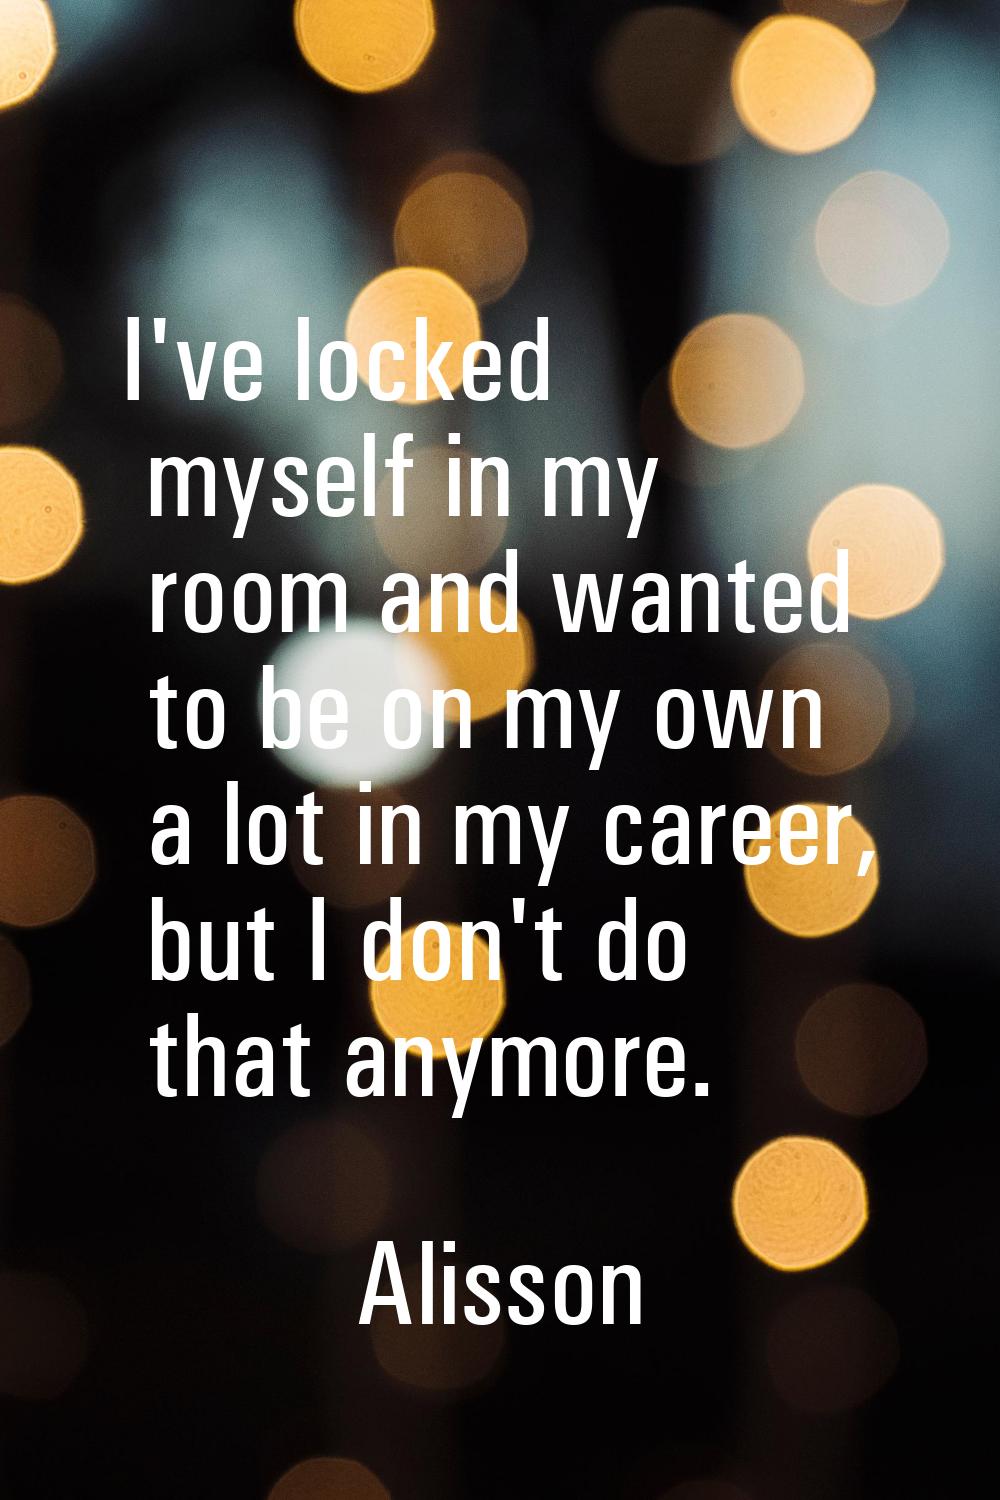 I've locked myself in my room and wanted to be on my own a lot in my career, but I don't do that an